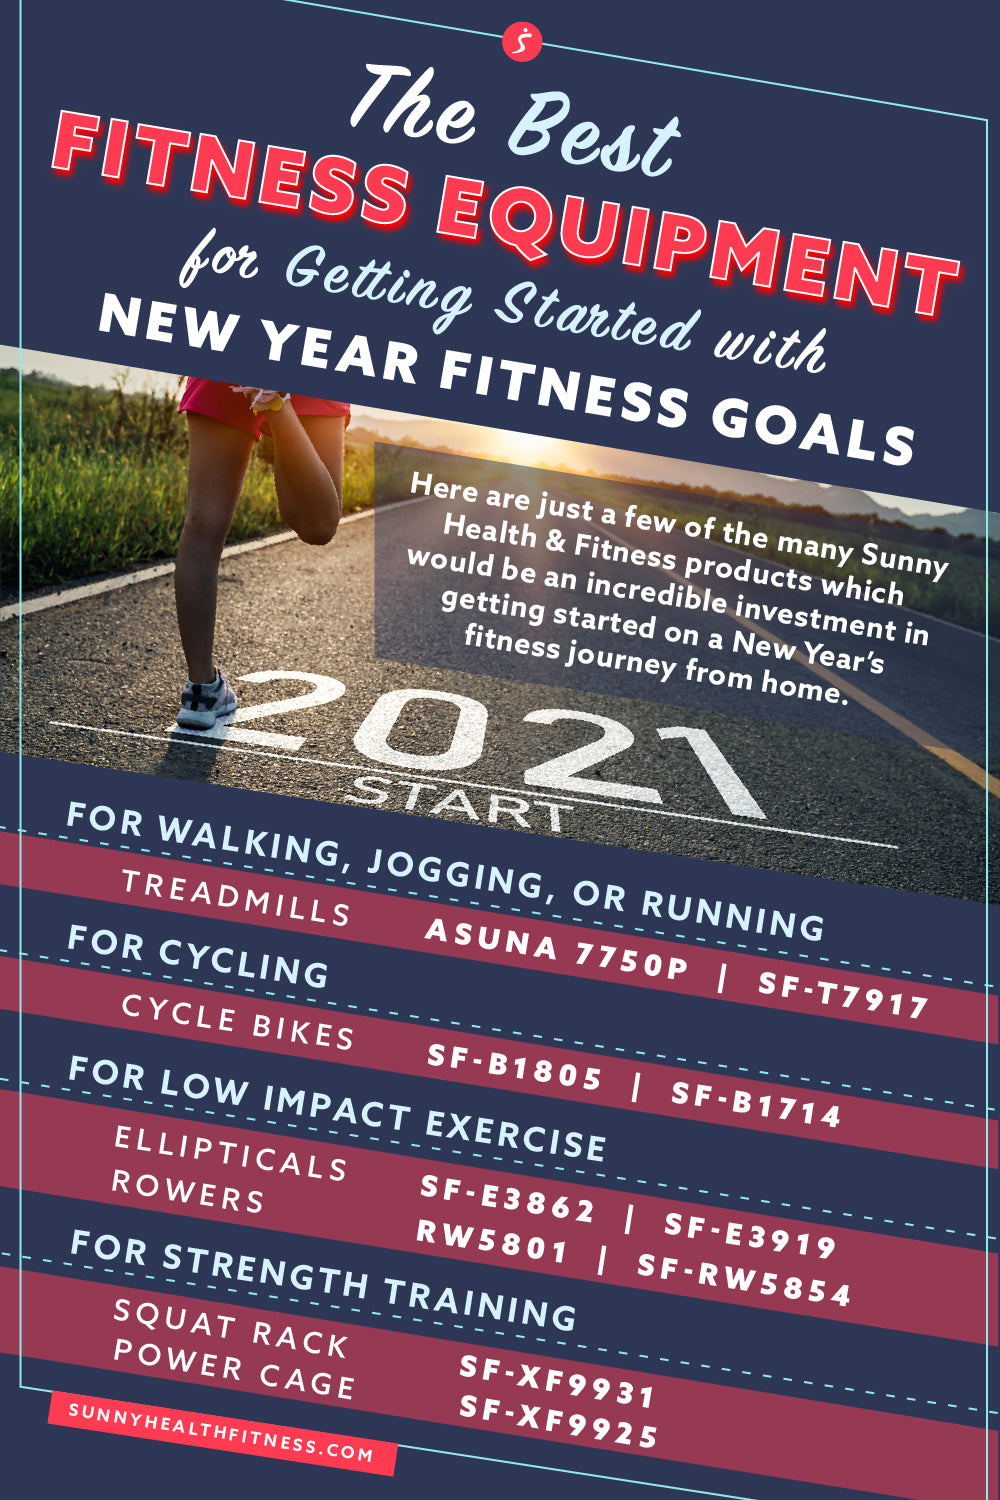 Best Fitness Equipment for Getting Started with New Year Fitness Goals Infographic